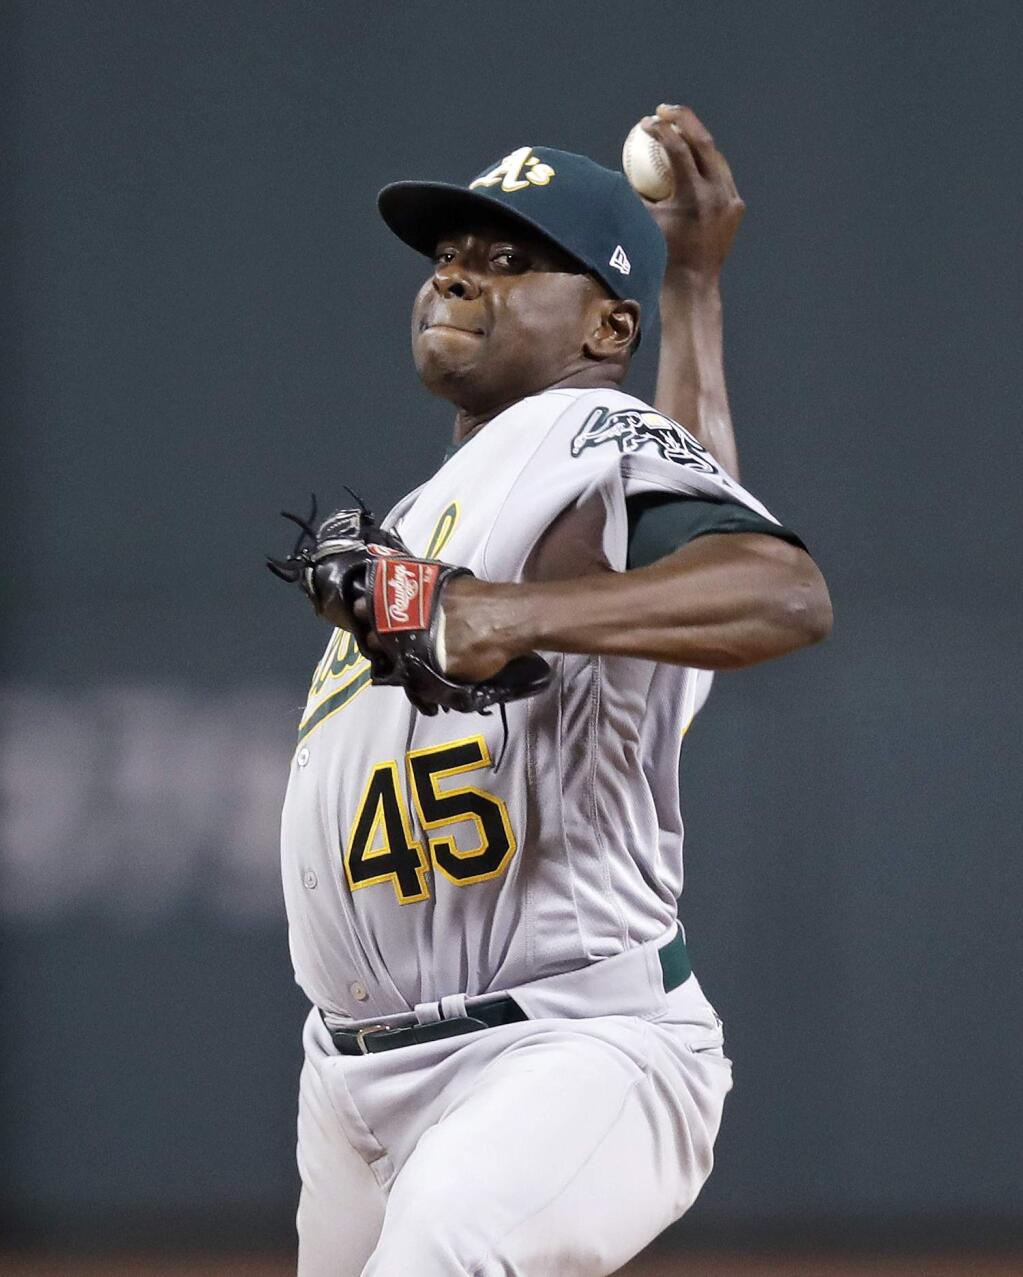 Oakland Athletics starting pitcher Jharel Cotton delivers during the first inning against the Boston Red Sox at Fenway Park in Boston, Wednesday, Sept. 13, 2017. (AP Photo/Charles Krupa)